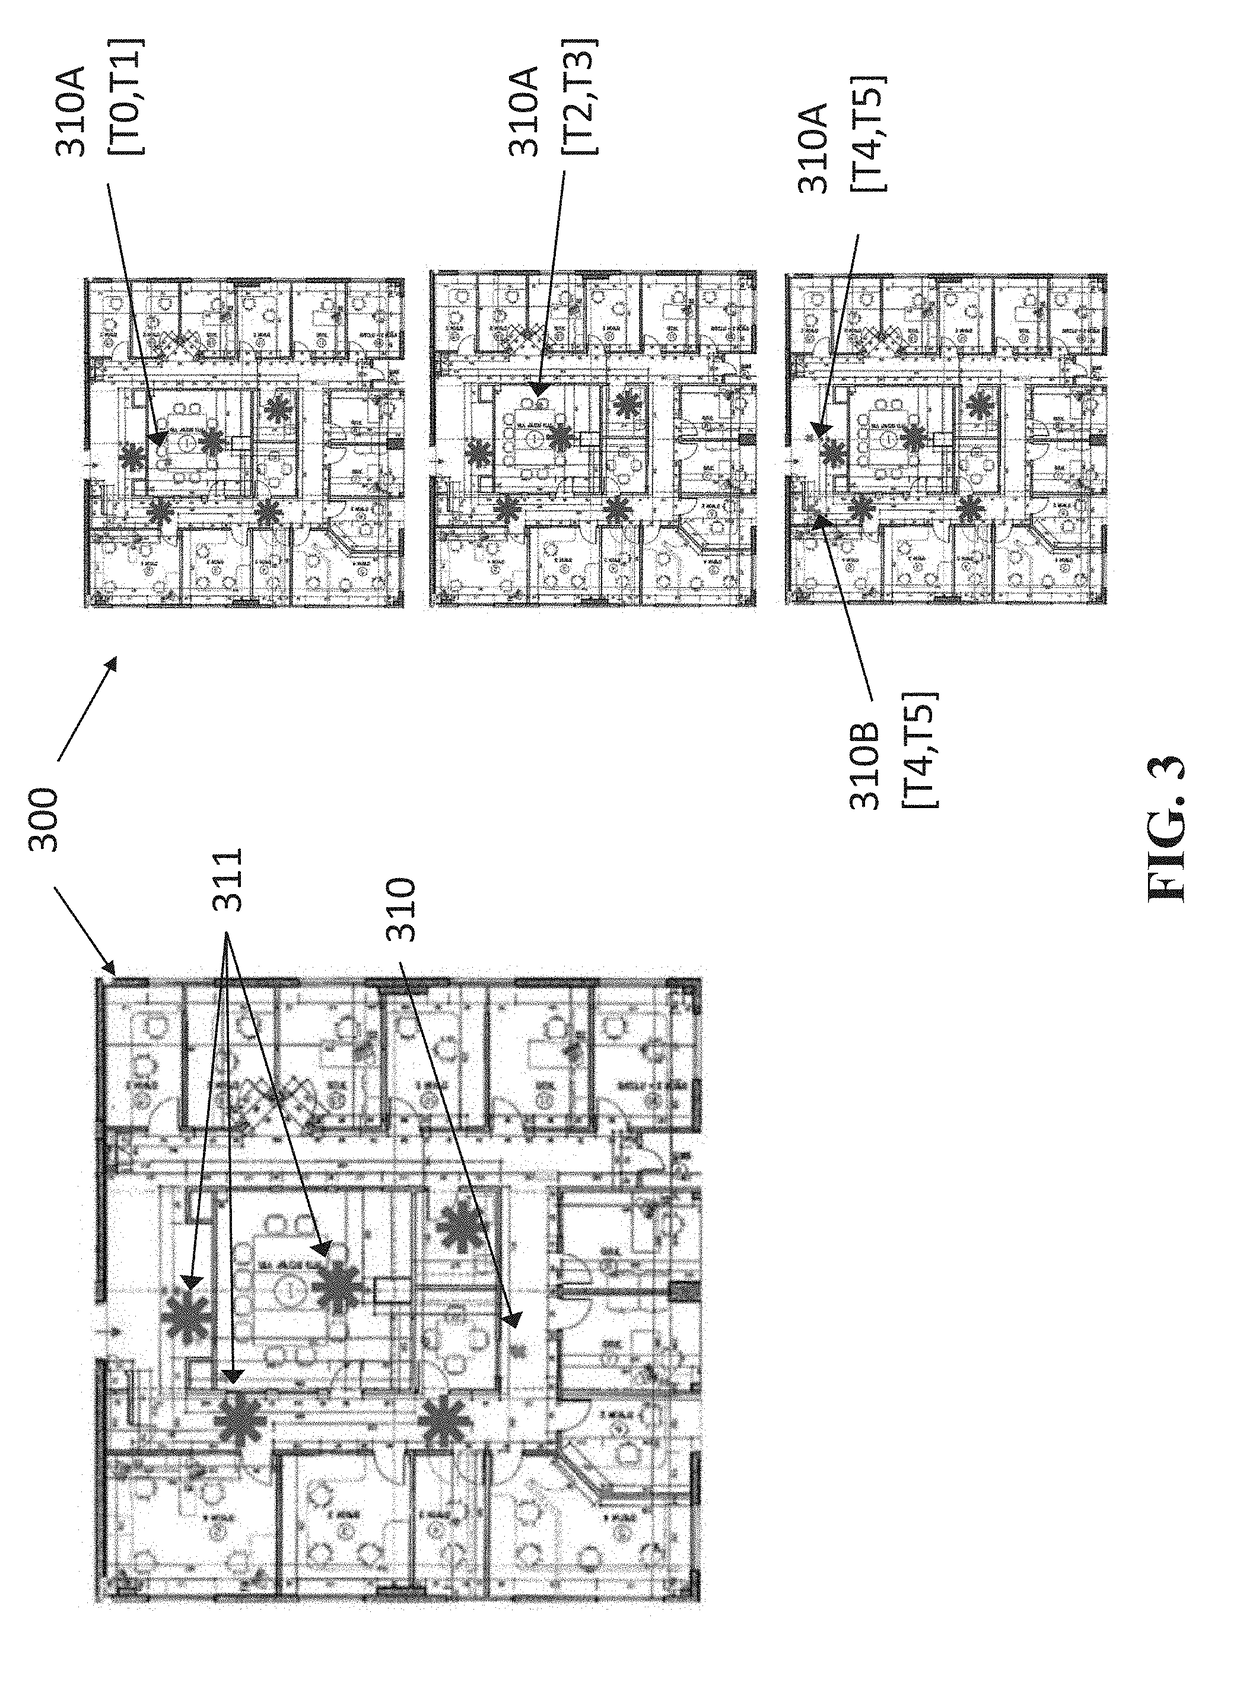 Physical activity authentication systems and methods